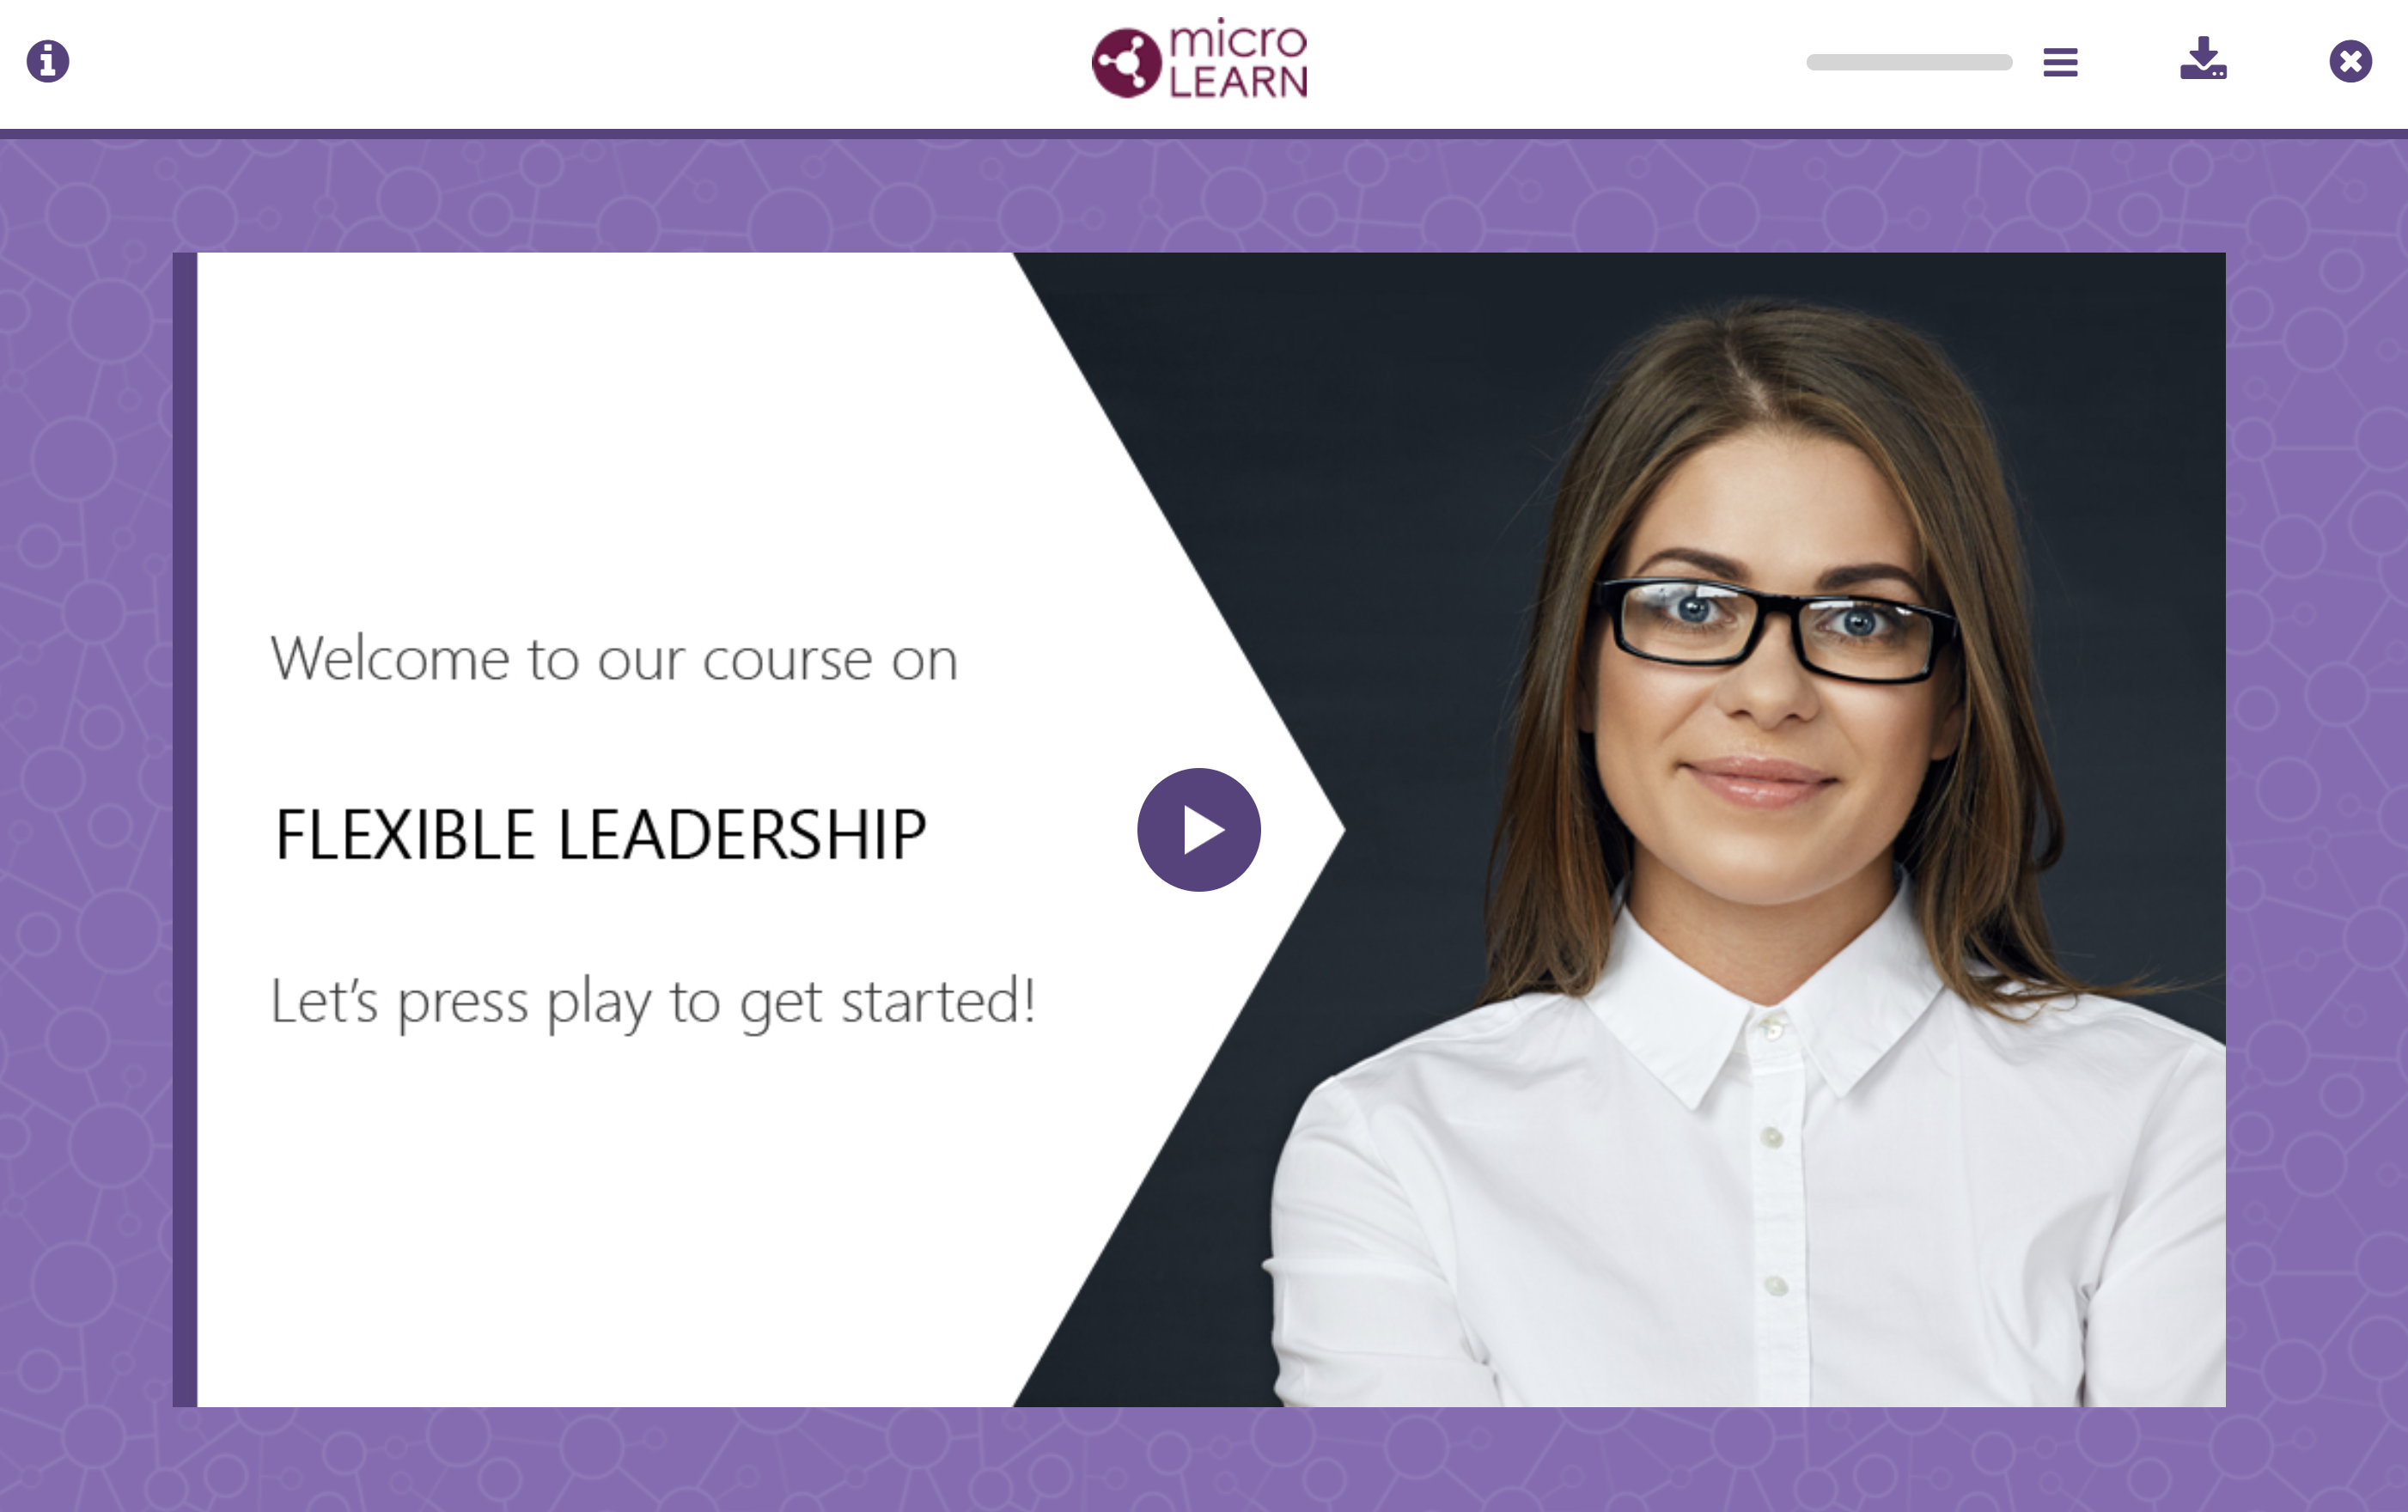 This image shows a screen shot of the flexible leadership module